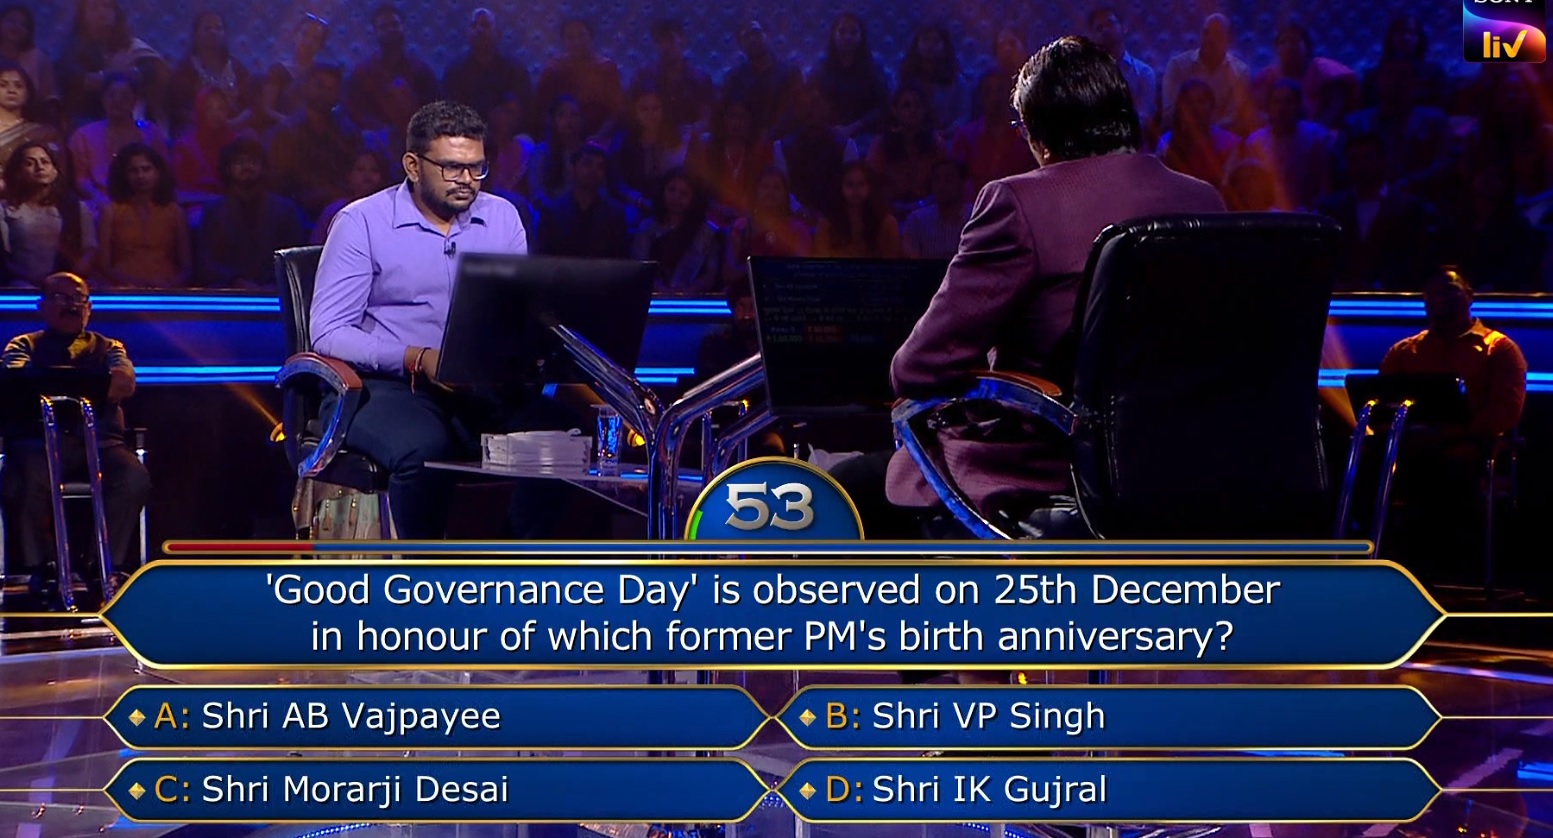 Ques : ‘Good Governance Day’ is observed on 25th December in honour of which former PM’s birth anniversary?